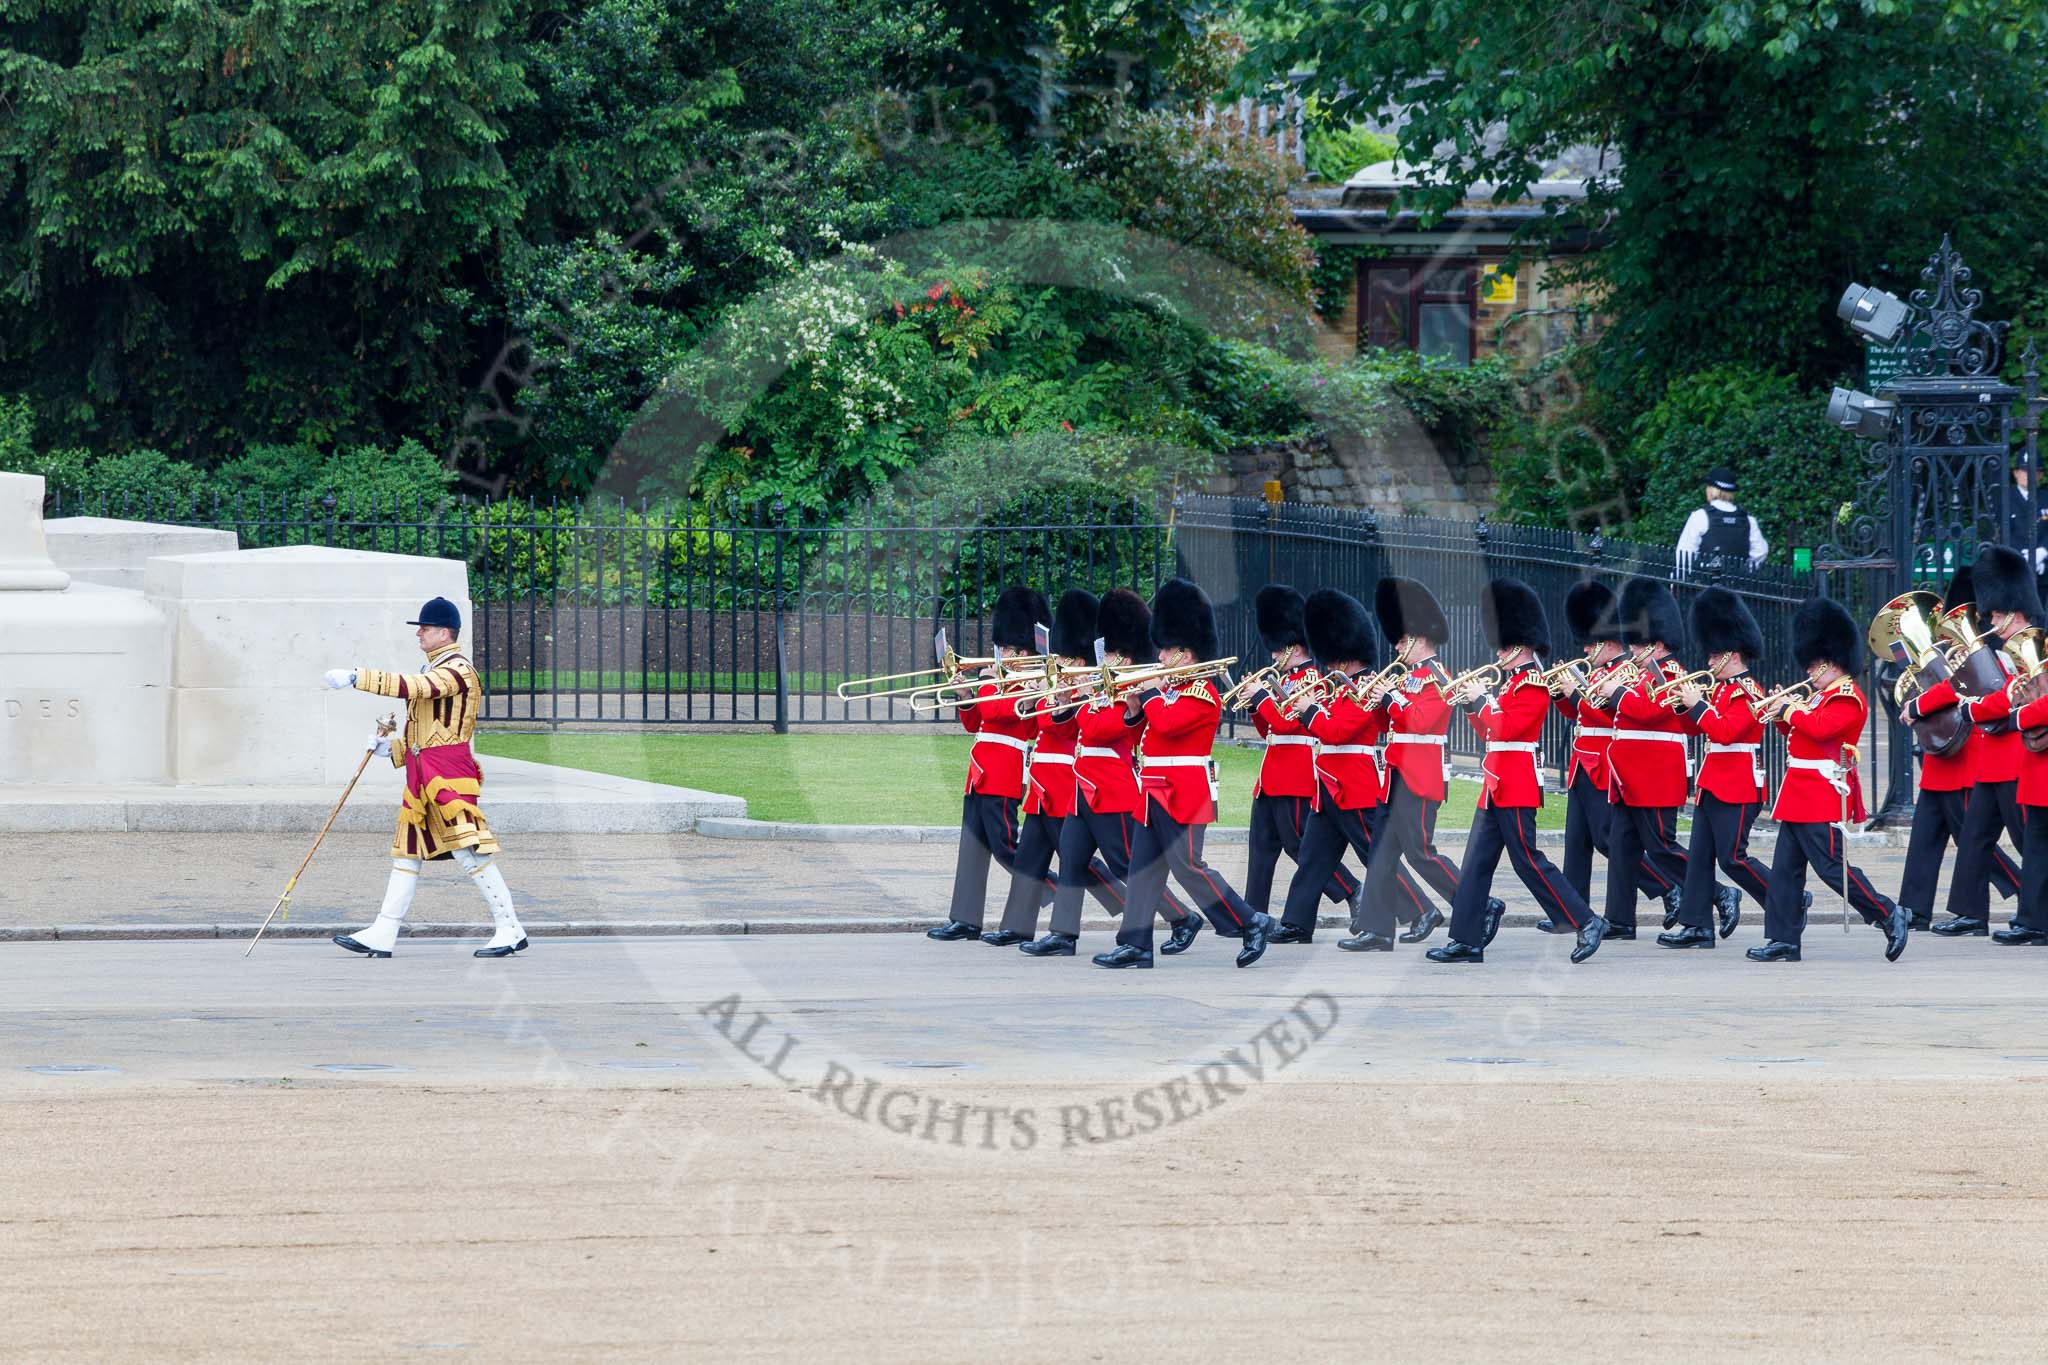 Trooping the Colour 2013: Drum Major Tony Taylor, Coldstream Guards, leading the second band to arrive at Horse Guards Parade, the Band of the Irish Guards, along the Guards Memorial. Image #51, 15 June 2013 10:14 Horse Guards Parade, London, UK